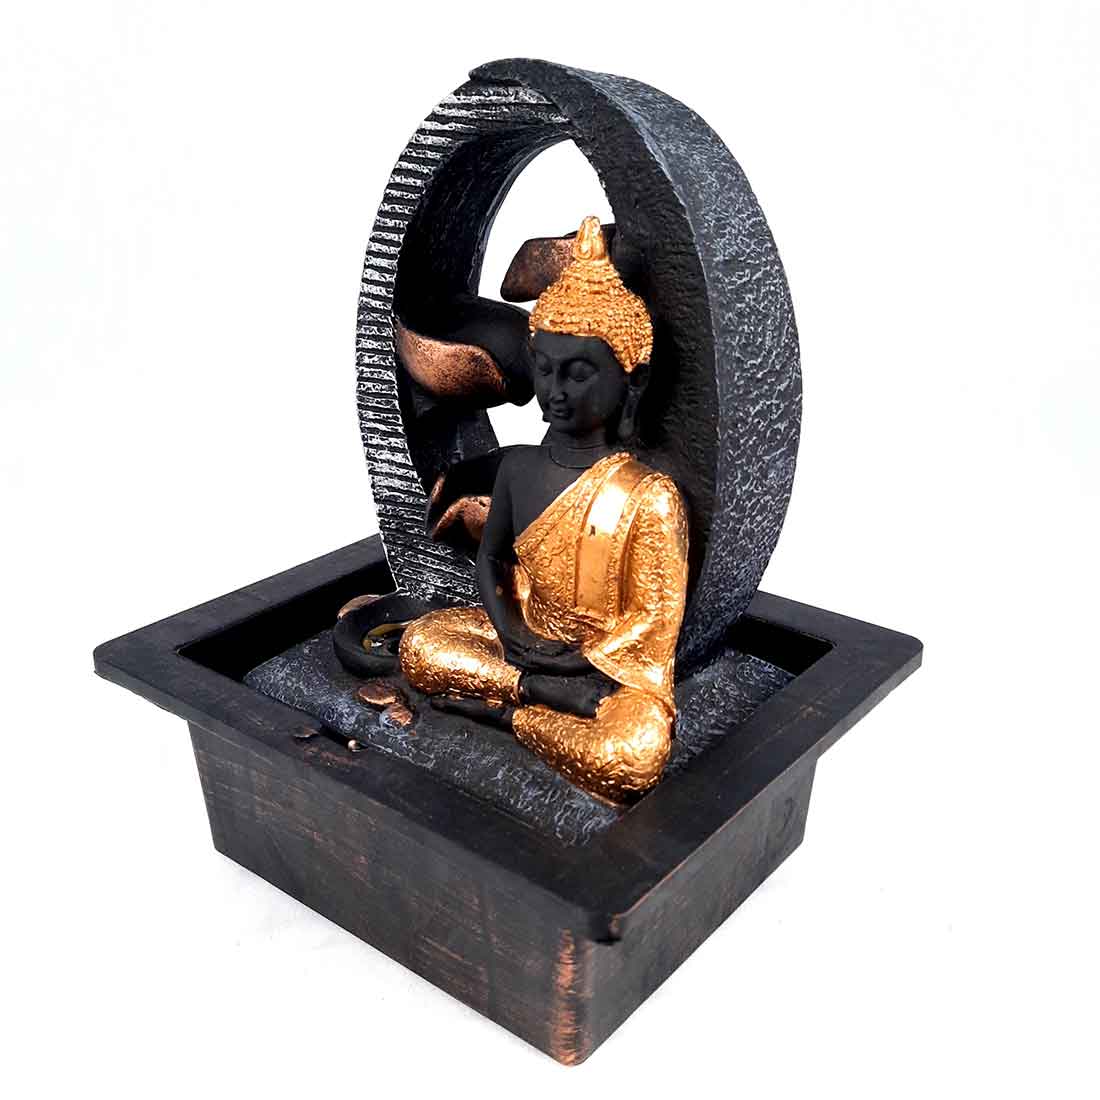 Water Fountains with LED Lights | Buddha Design - For Tabletop, Living Room, Garden & Home Decoration -10 Inch - ApkaMart